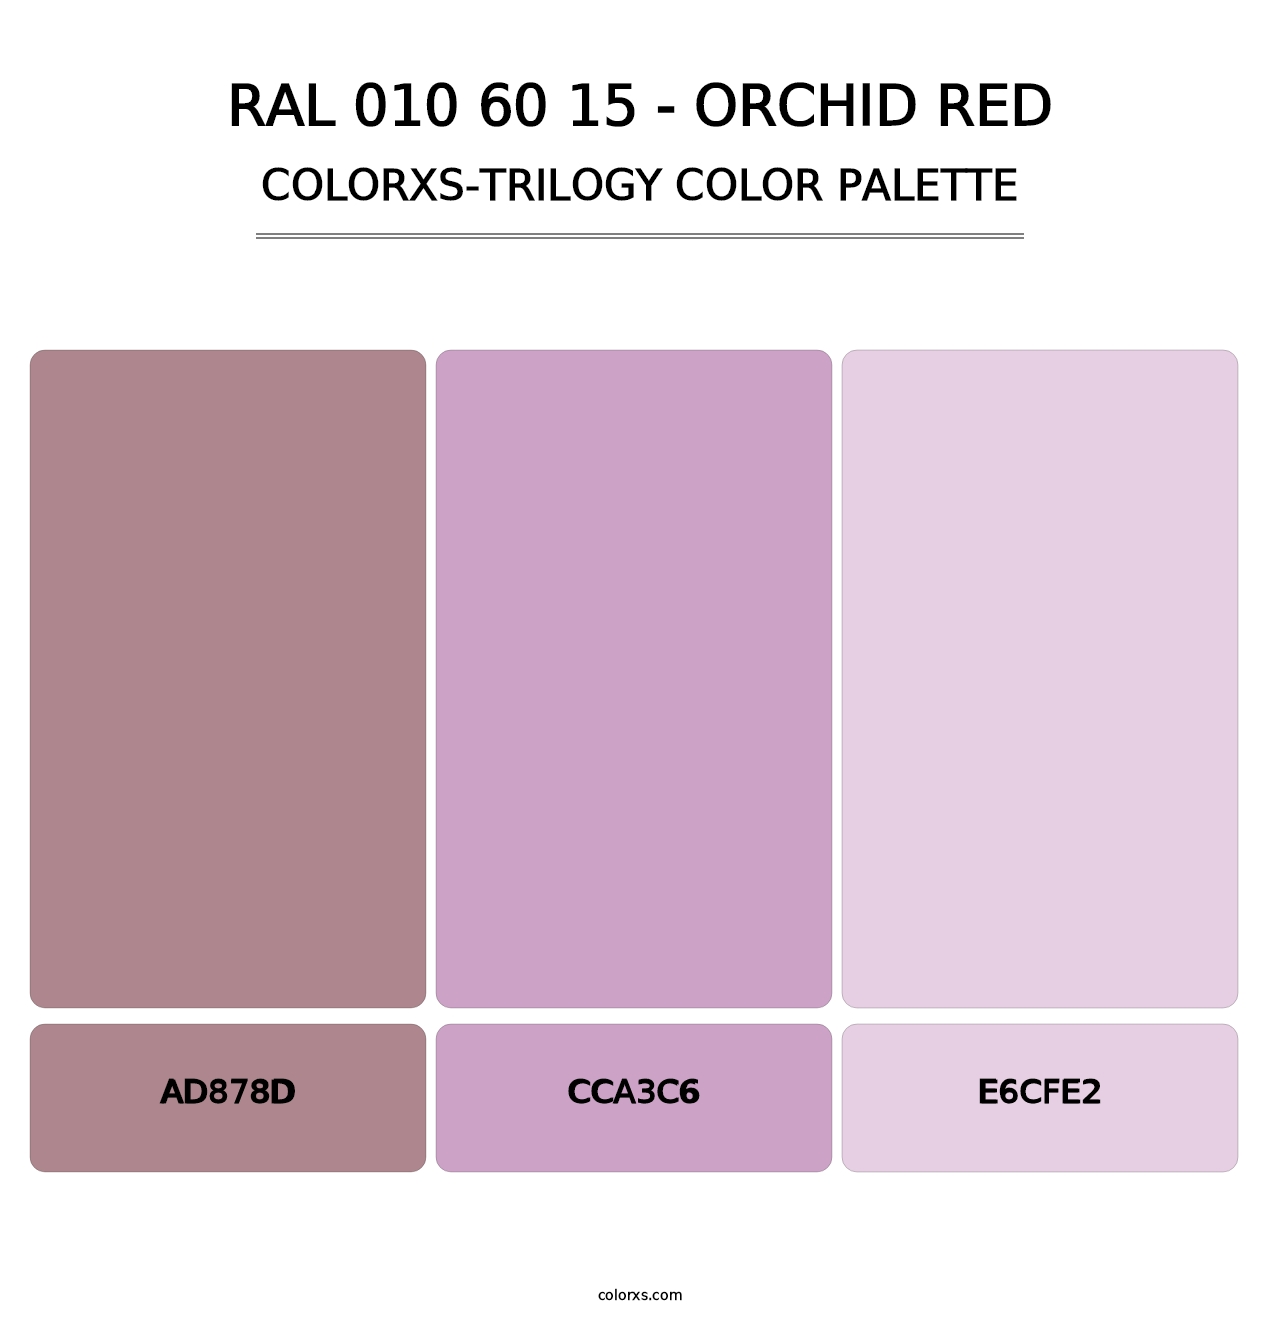 RAL 010 60 15 - Orchid Red - Colorxs Trilogy Palette